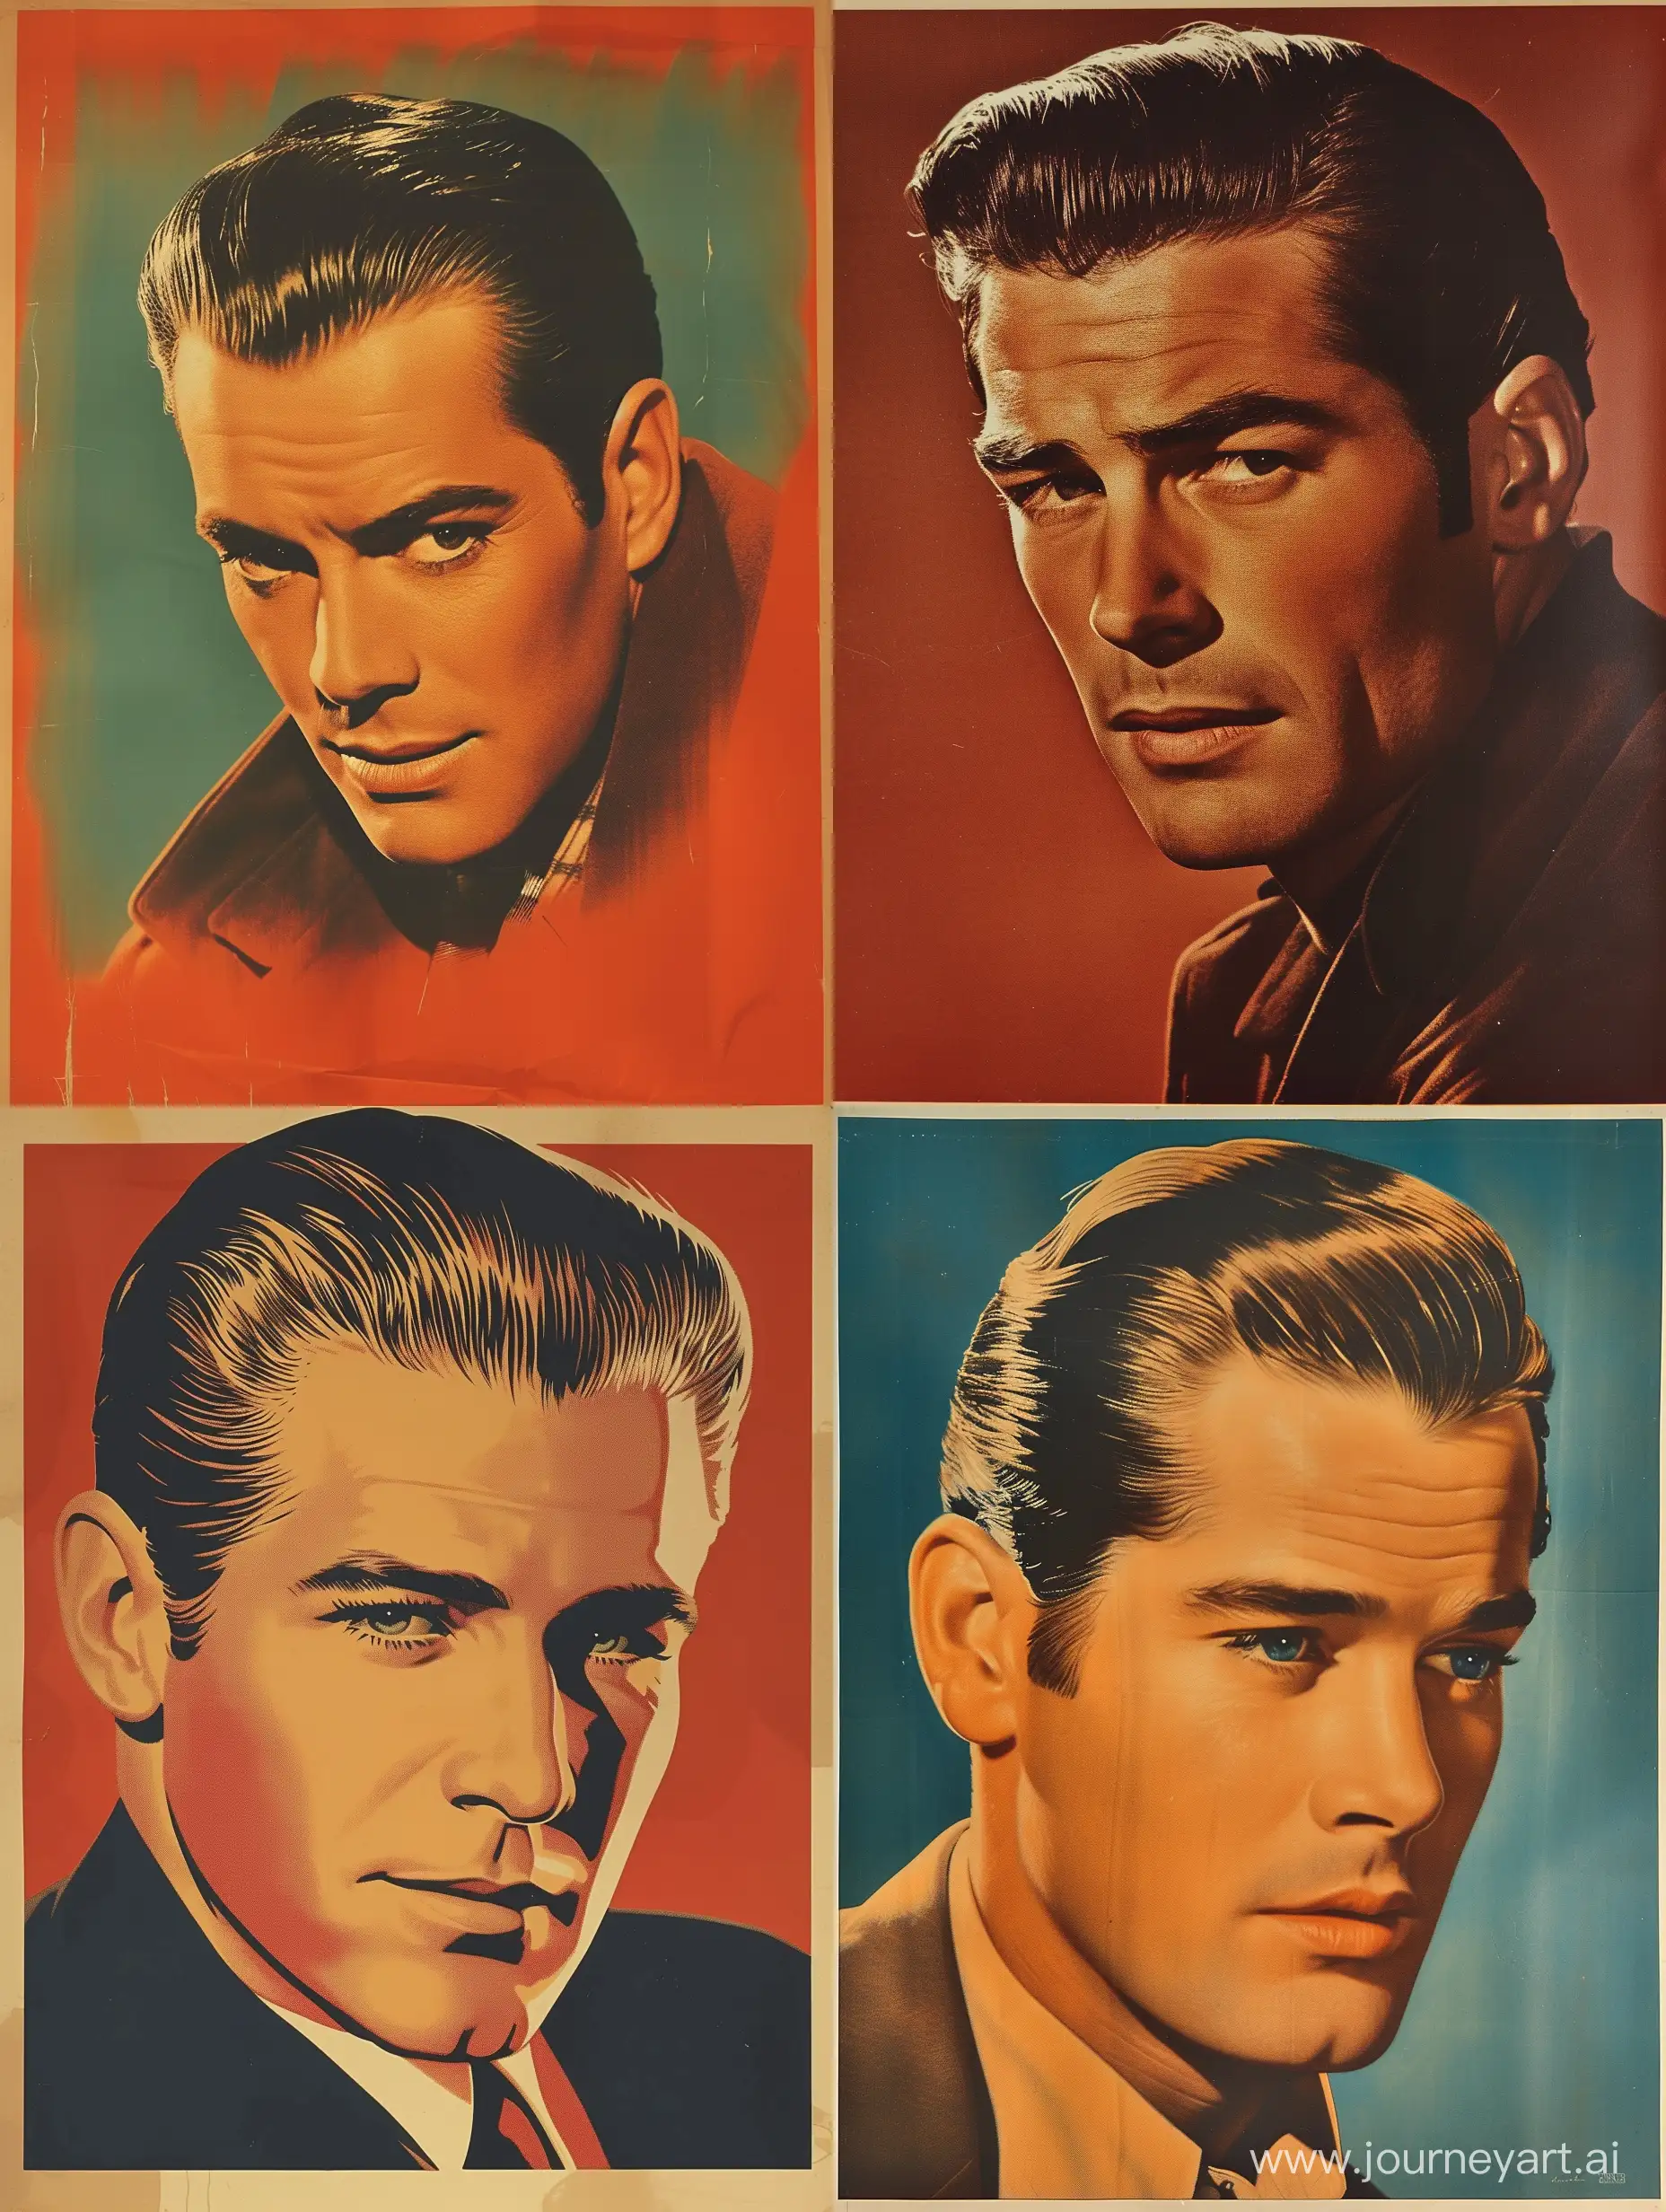 Vintage Pulp style poster of a handsome 1940s actor man with slicked-back hair